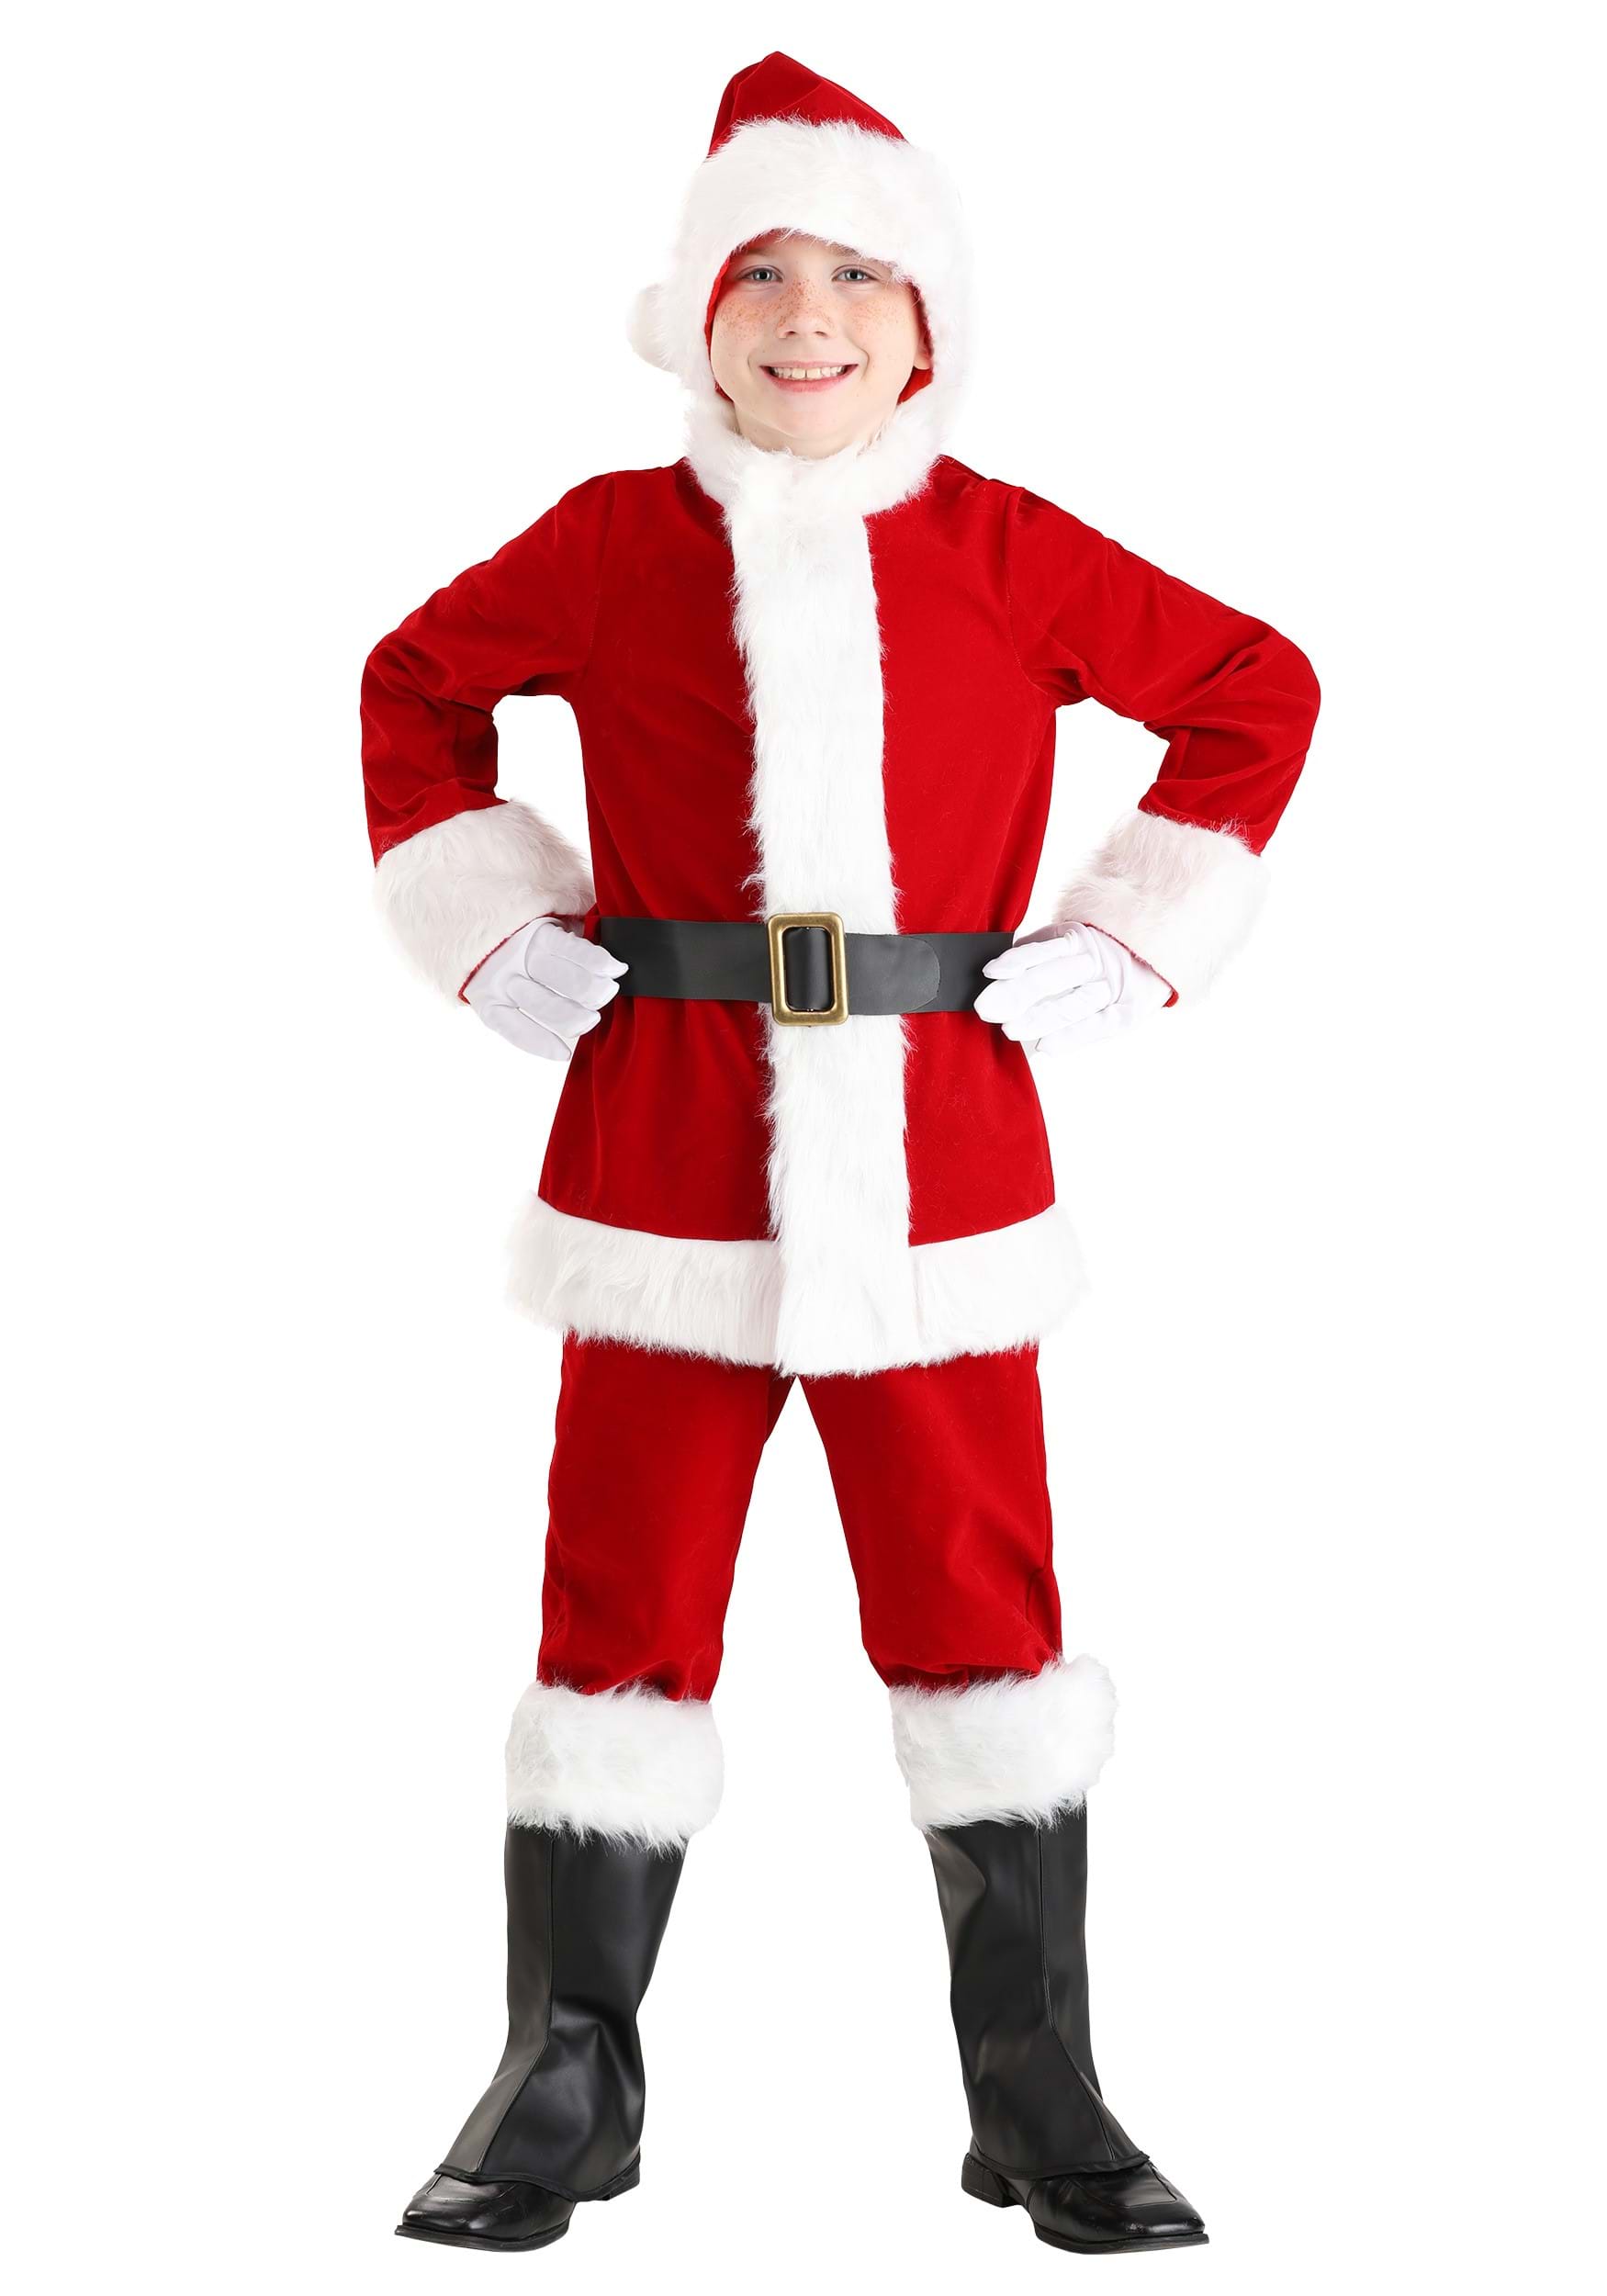 Photos - Fancy Dress Deluxe FUN Costumes Boy's  Santa Claus Costume Black/Red/White 